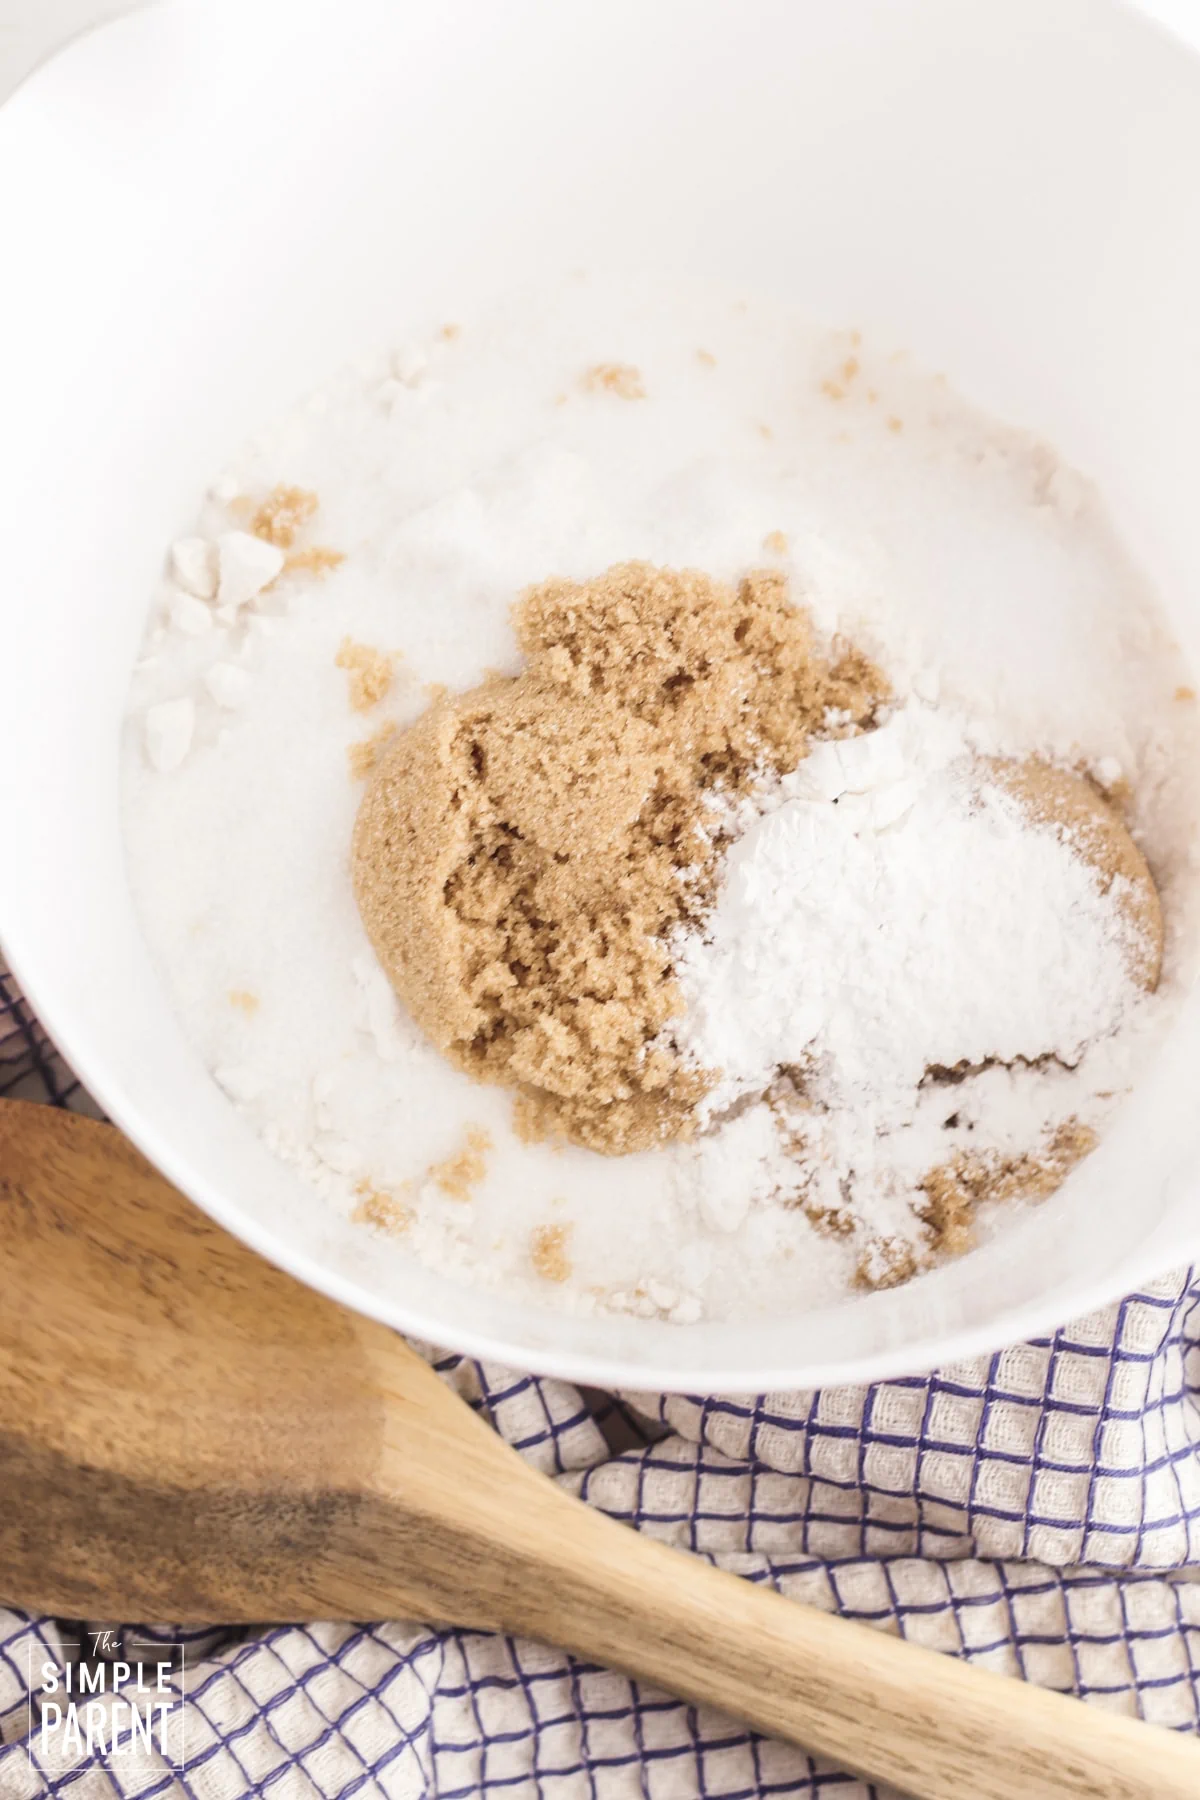 Dry ingredients for muffin in mixing bowl